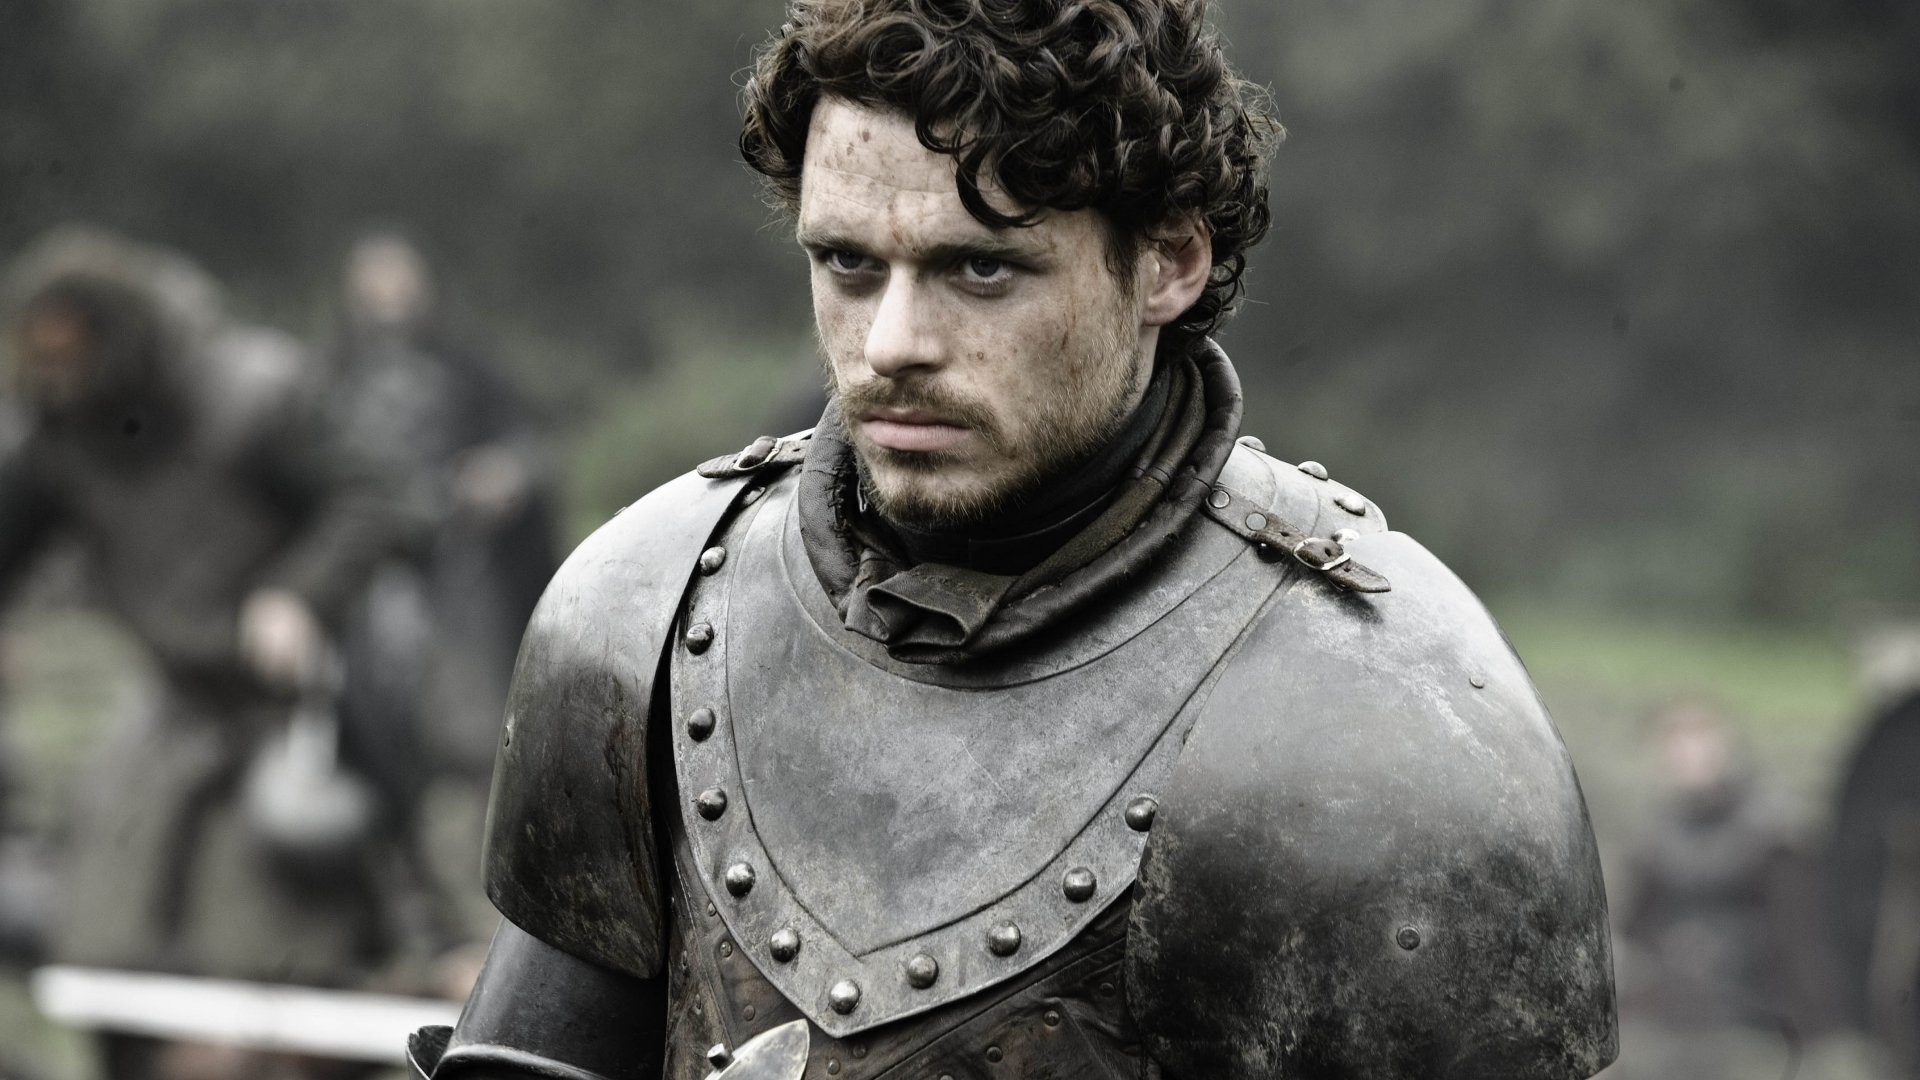 Richard Madden: Robb the Lord, Wolf King, The wolfling. 1920x1080 Full HD Background.